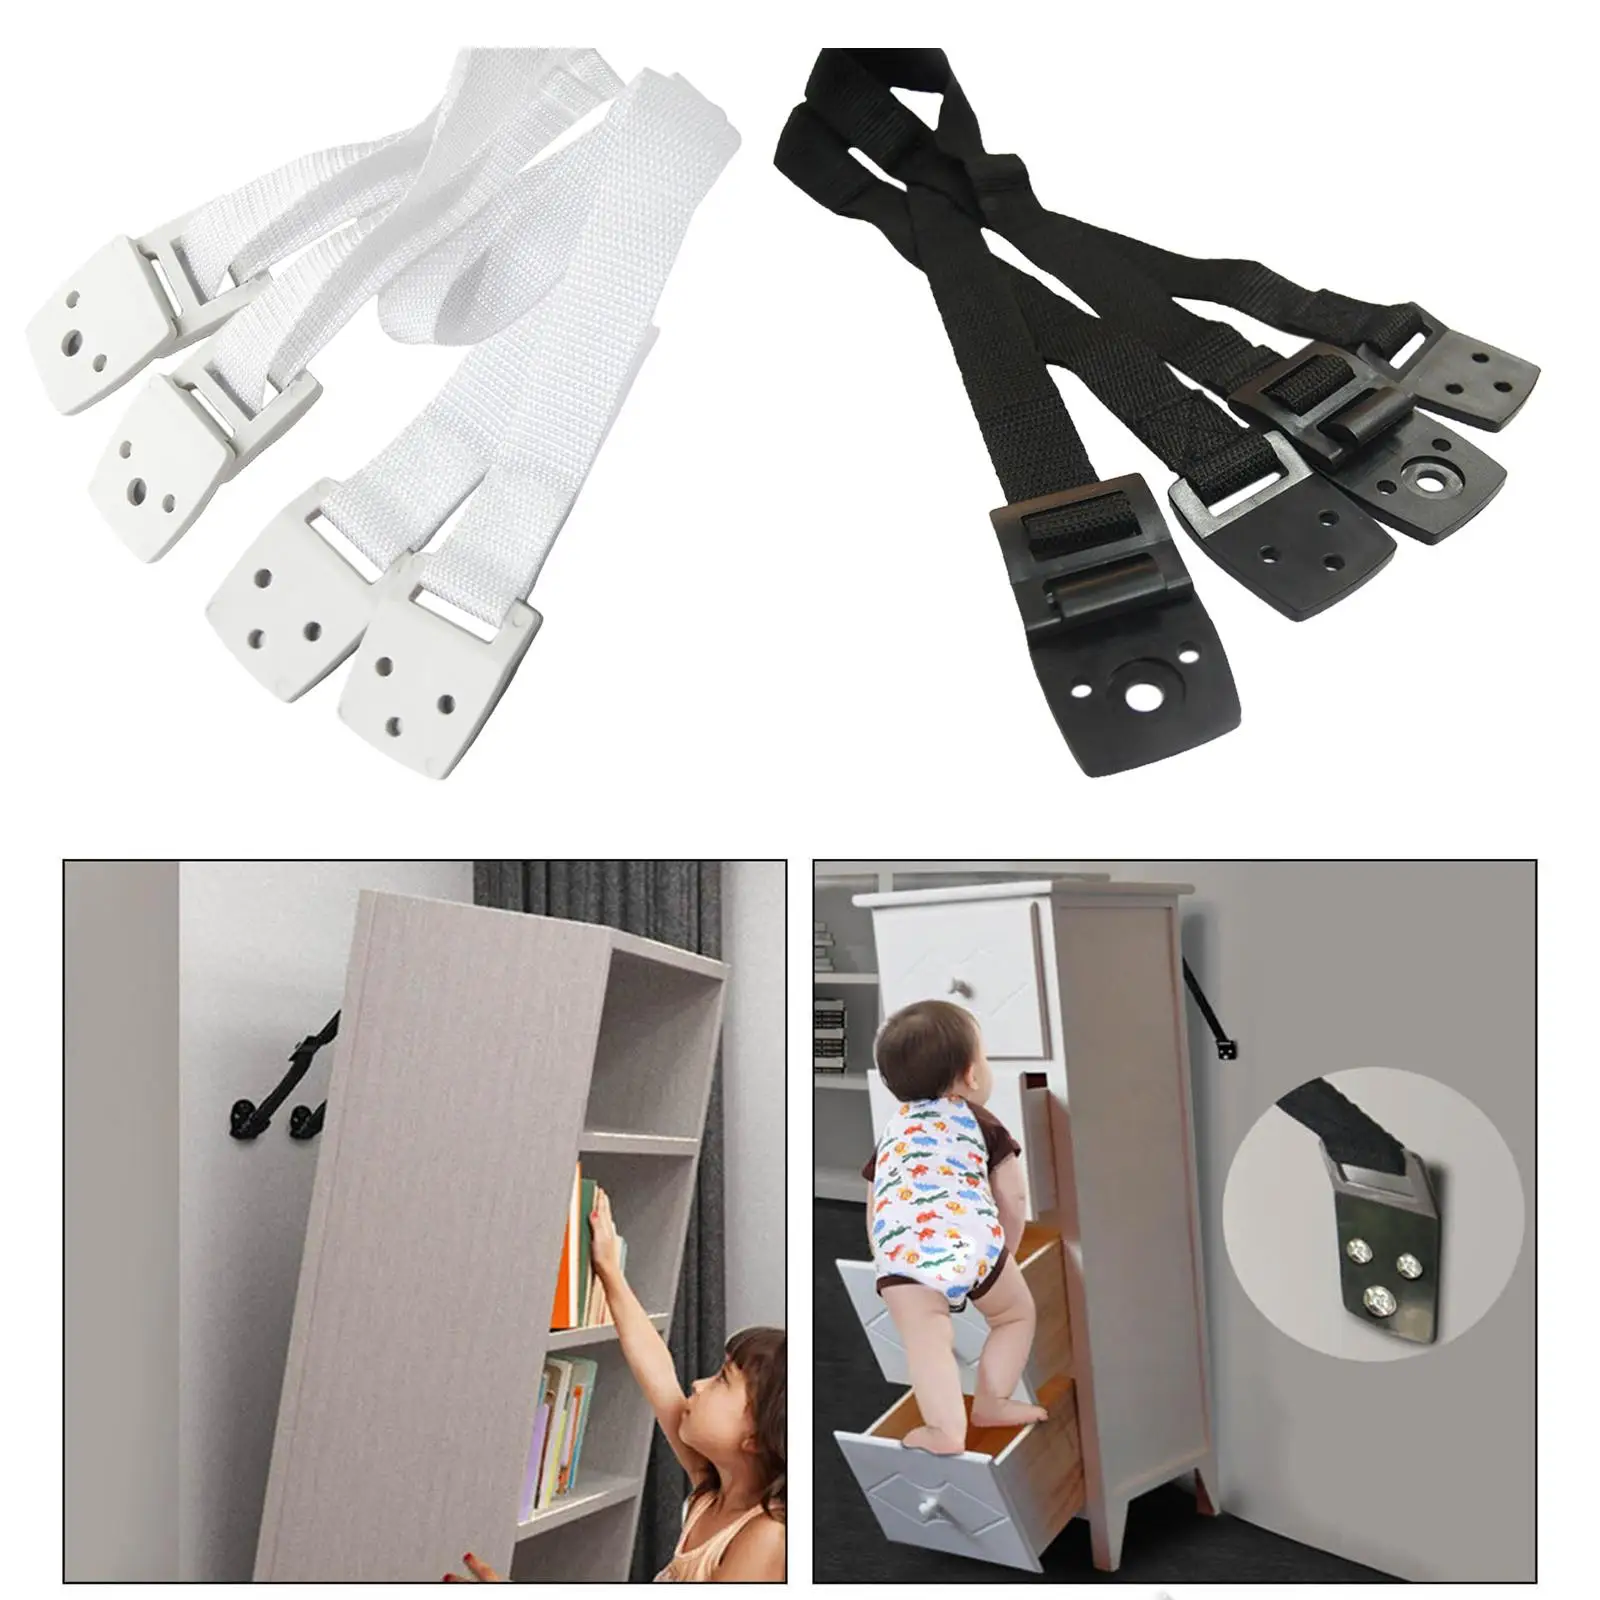 TV Anti Tip Straps Heavy Duty Secure Stand Wall Strap Harness Holder TV Safety Straps for TV Stands Cabinets Dresser Protection